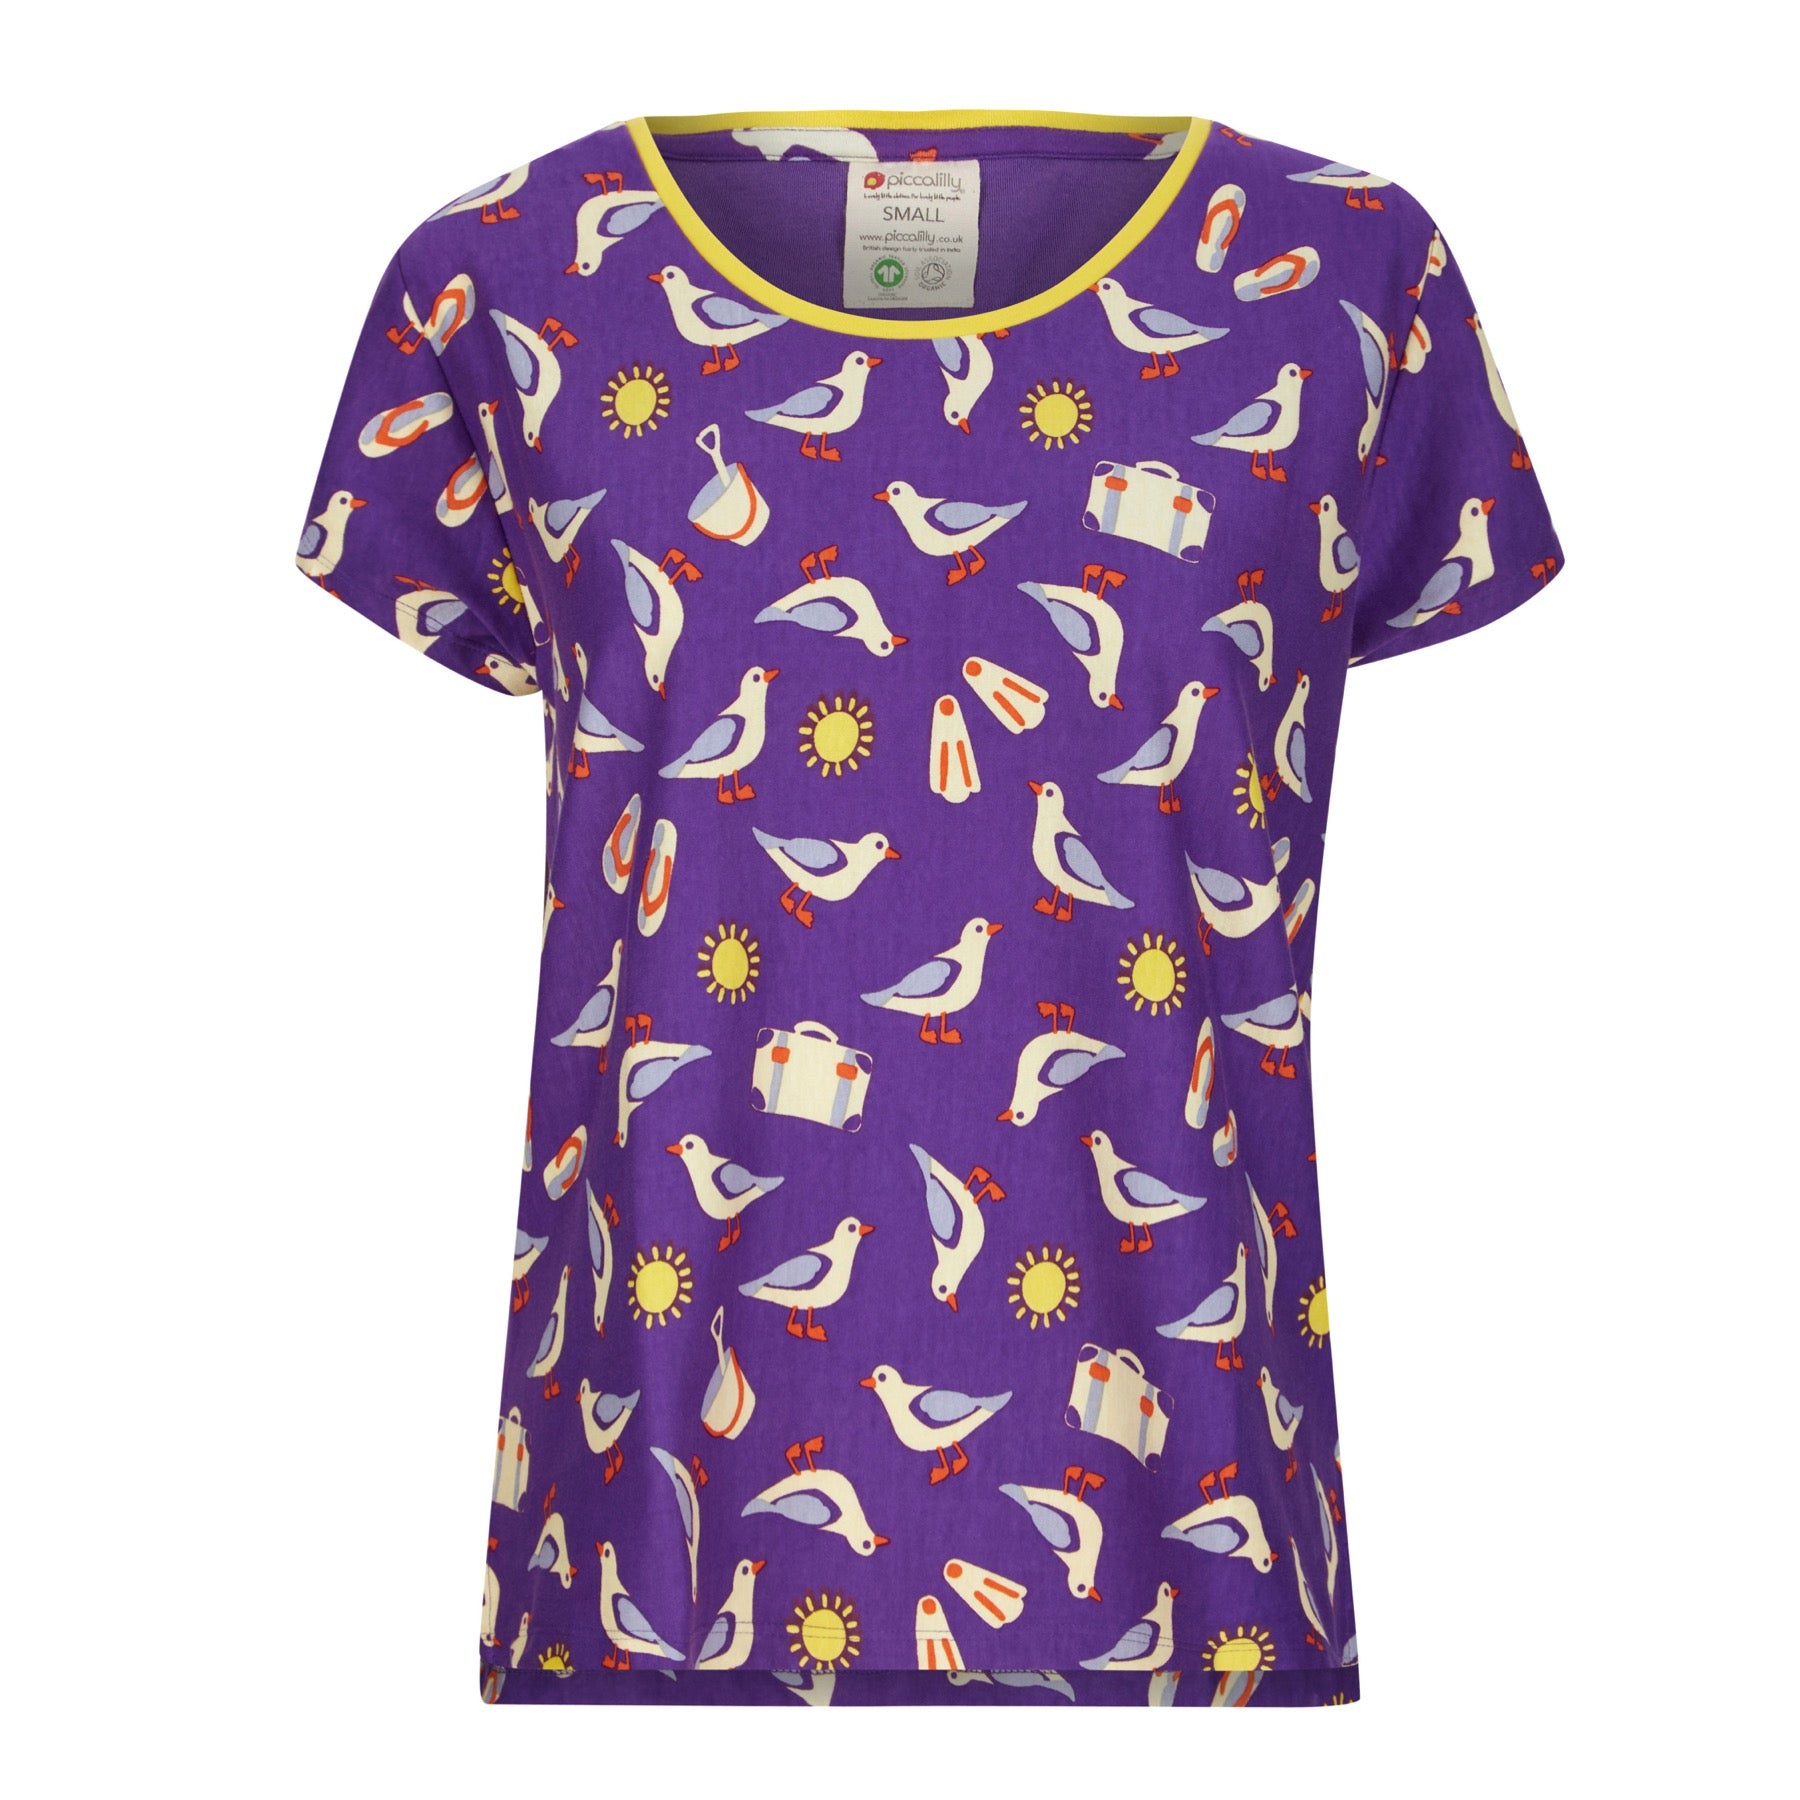 Piccalilly T-shirt Seagulls (Adult)